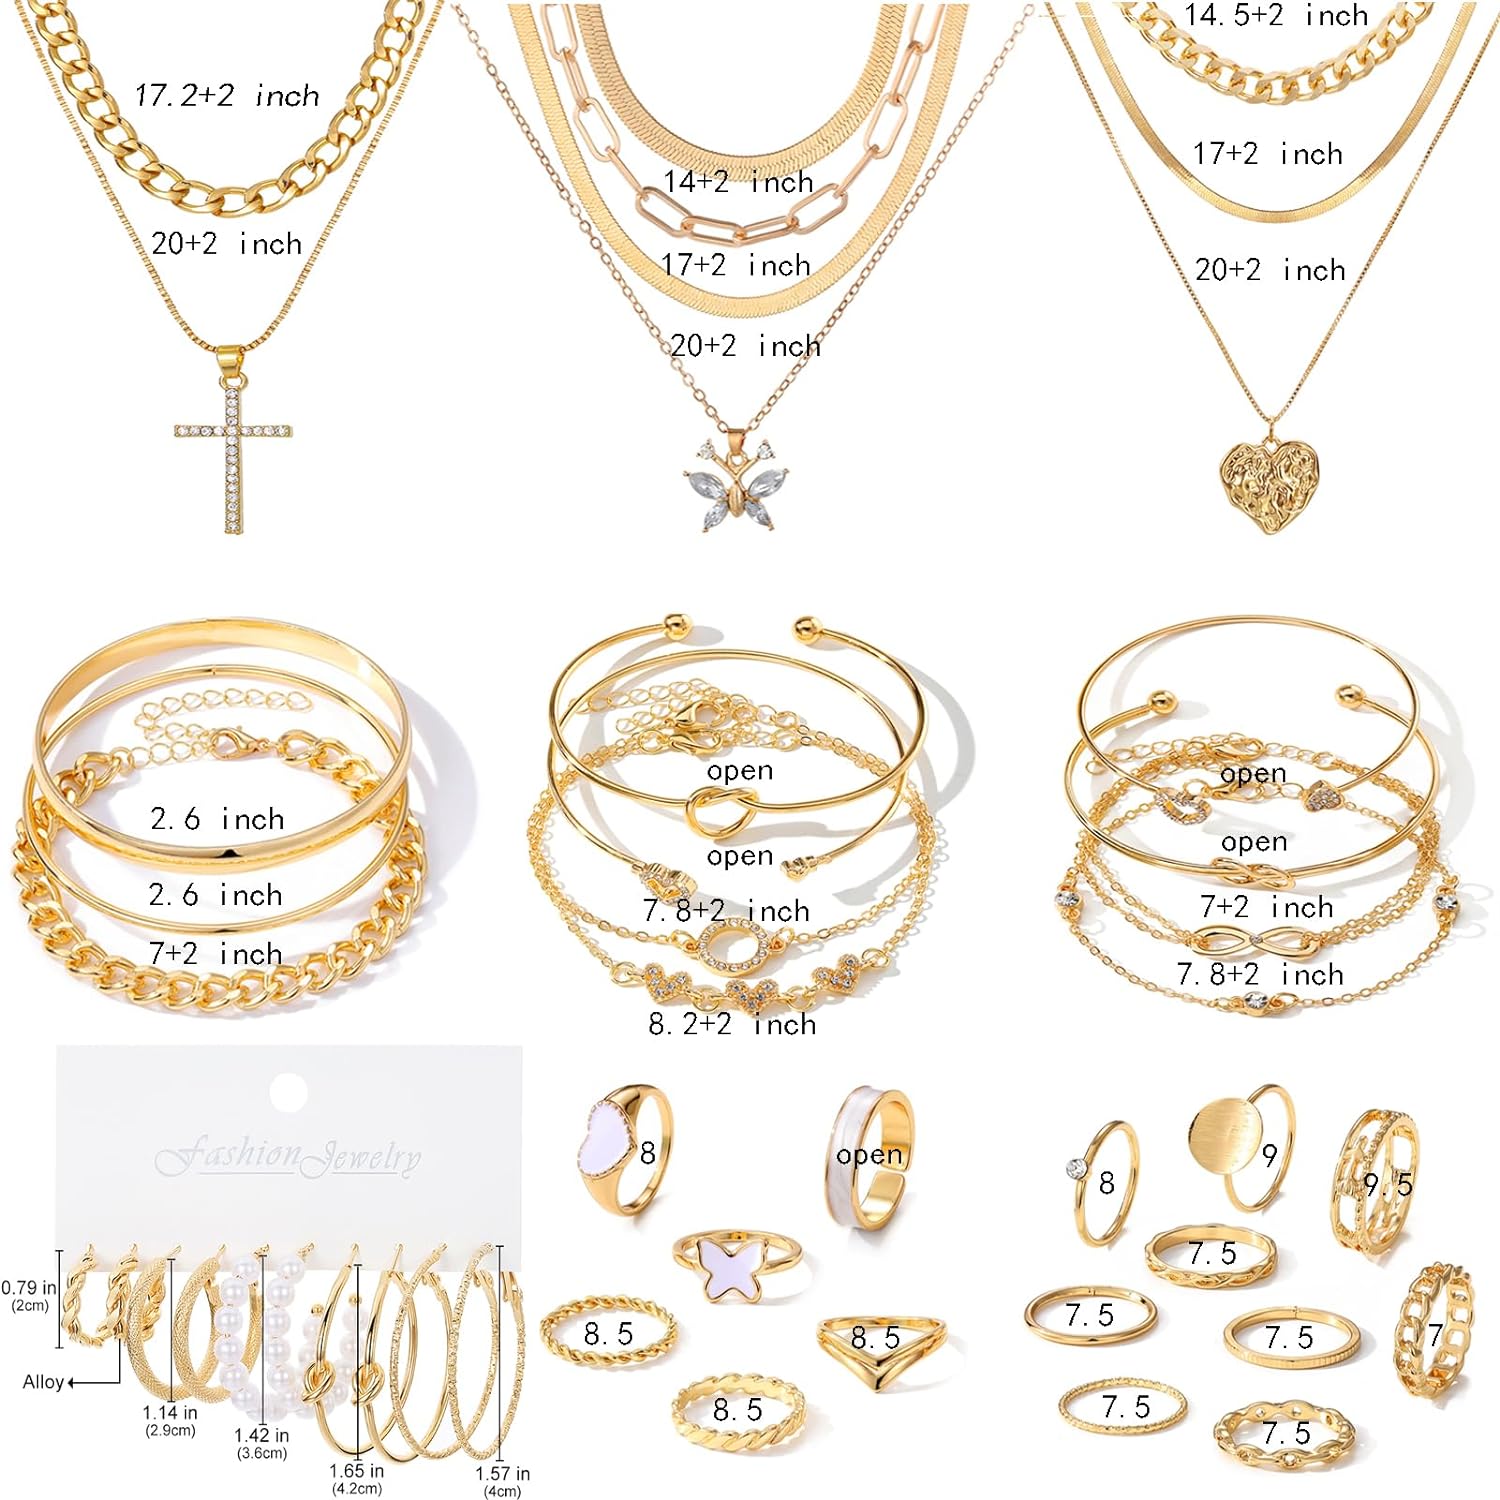 VKME 45 PCS Gold Jewelry Set for Women Girls Dainty Dangle Earrings,Elegant Knuckle Rings,Adjustable Bracelets and Necklaces,Perfect Fashion Anniversary Birthday Party Gift,Trendy Jewelry Pack